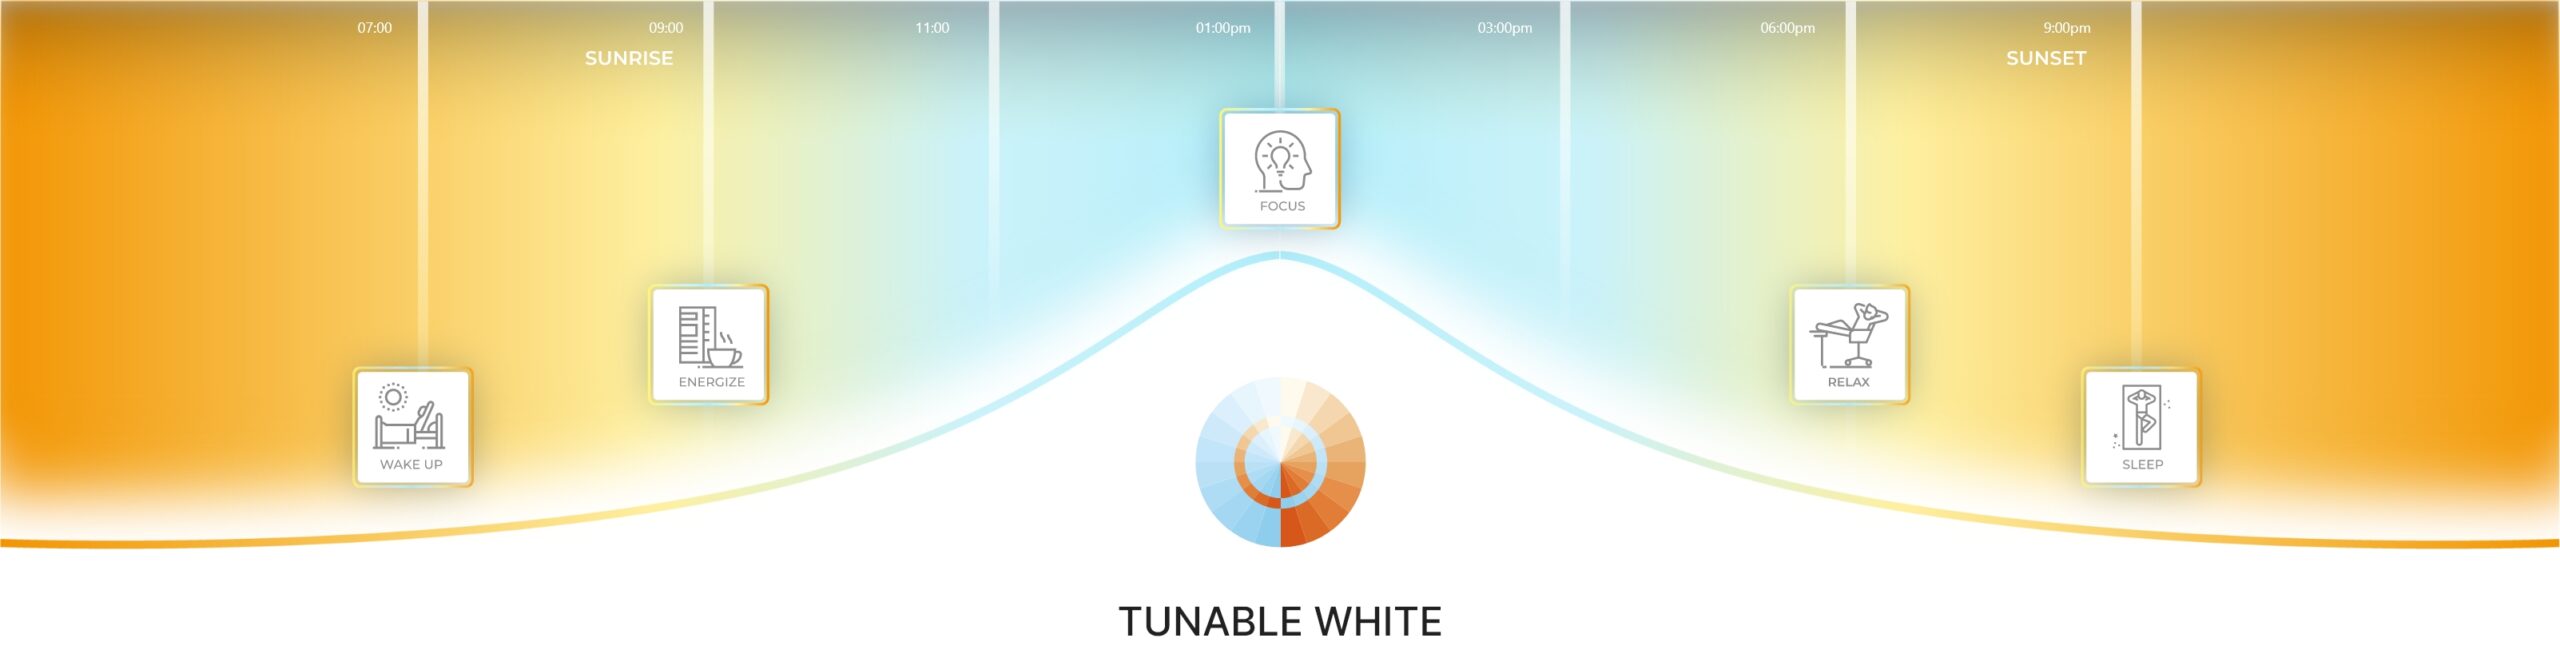 tunable white day to night banner with icon and text